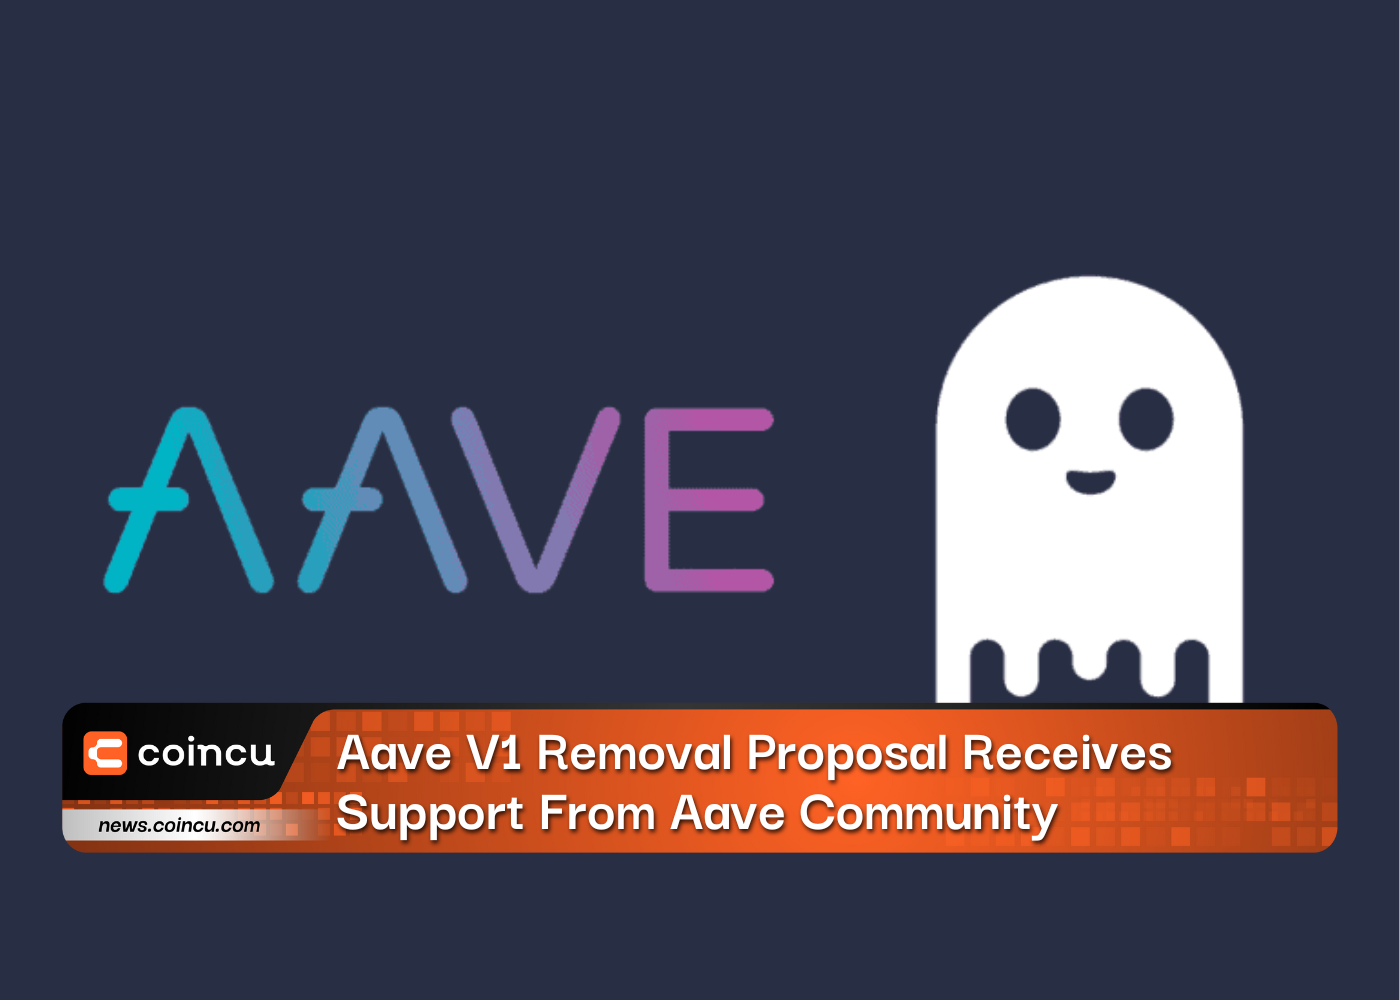 Aave V1 Removal Proposal Receives Support From Aave Community